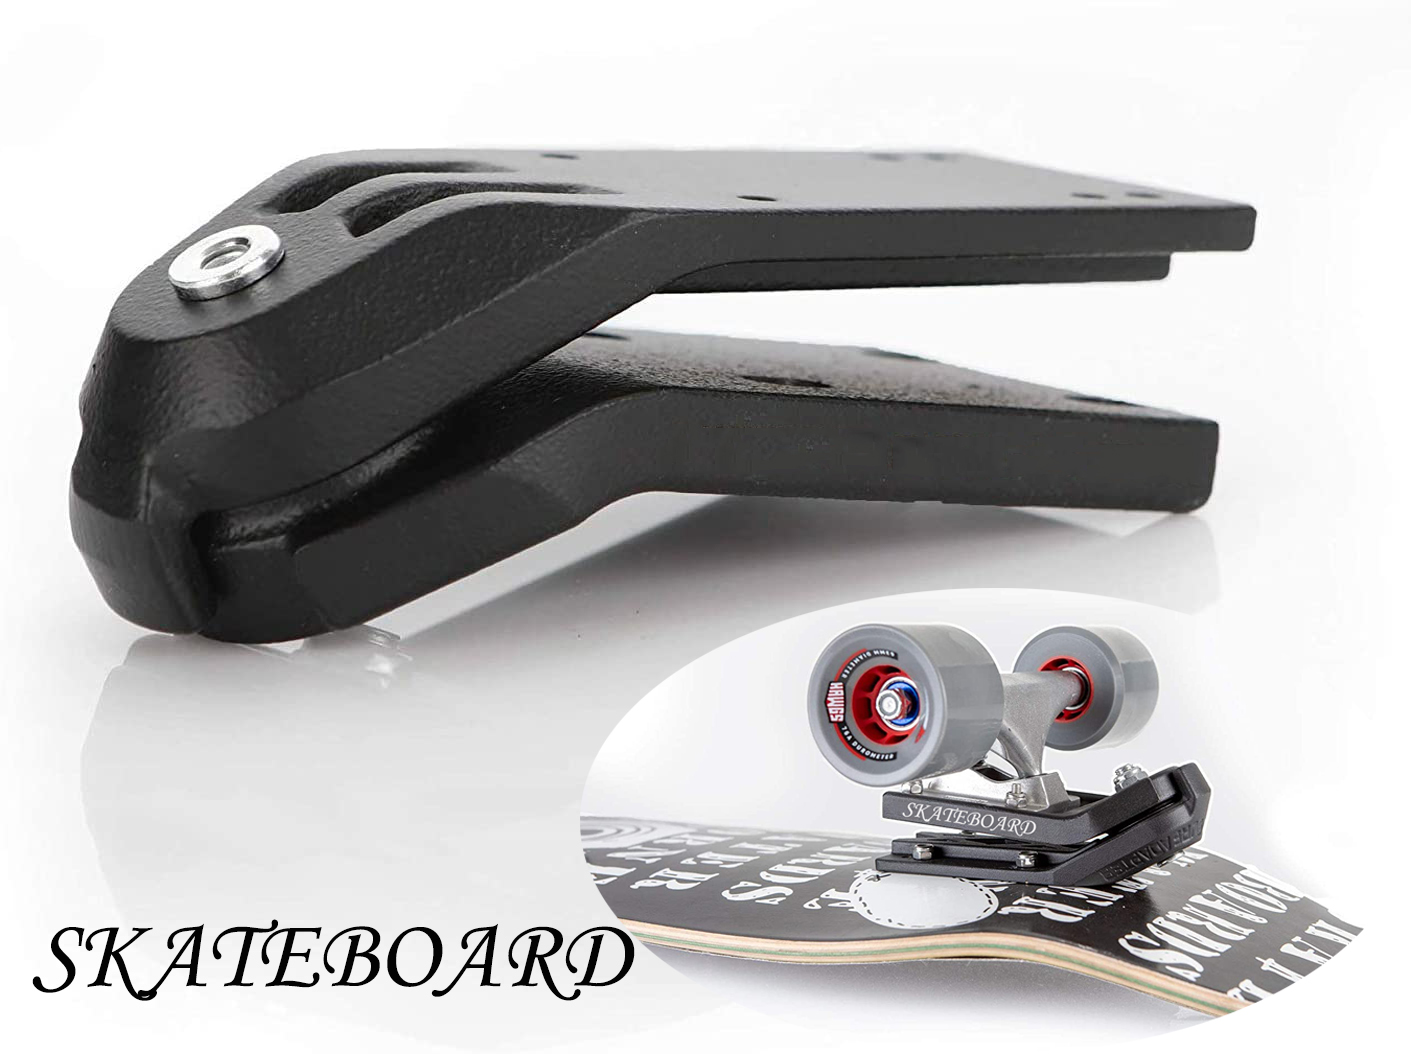 Skateboard Surf and Rail Adapter Surfskate Truck Fits Any Board - Carve & Cruise Like a Surfboard